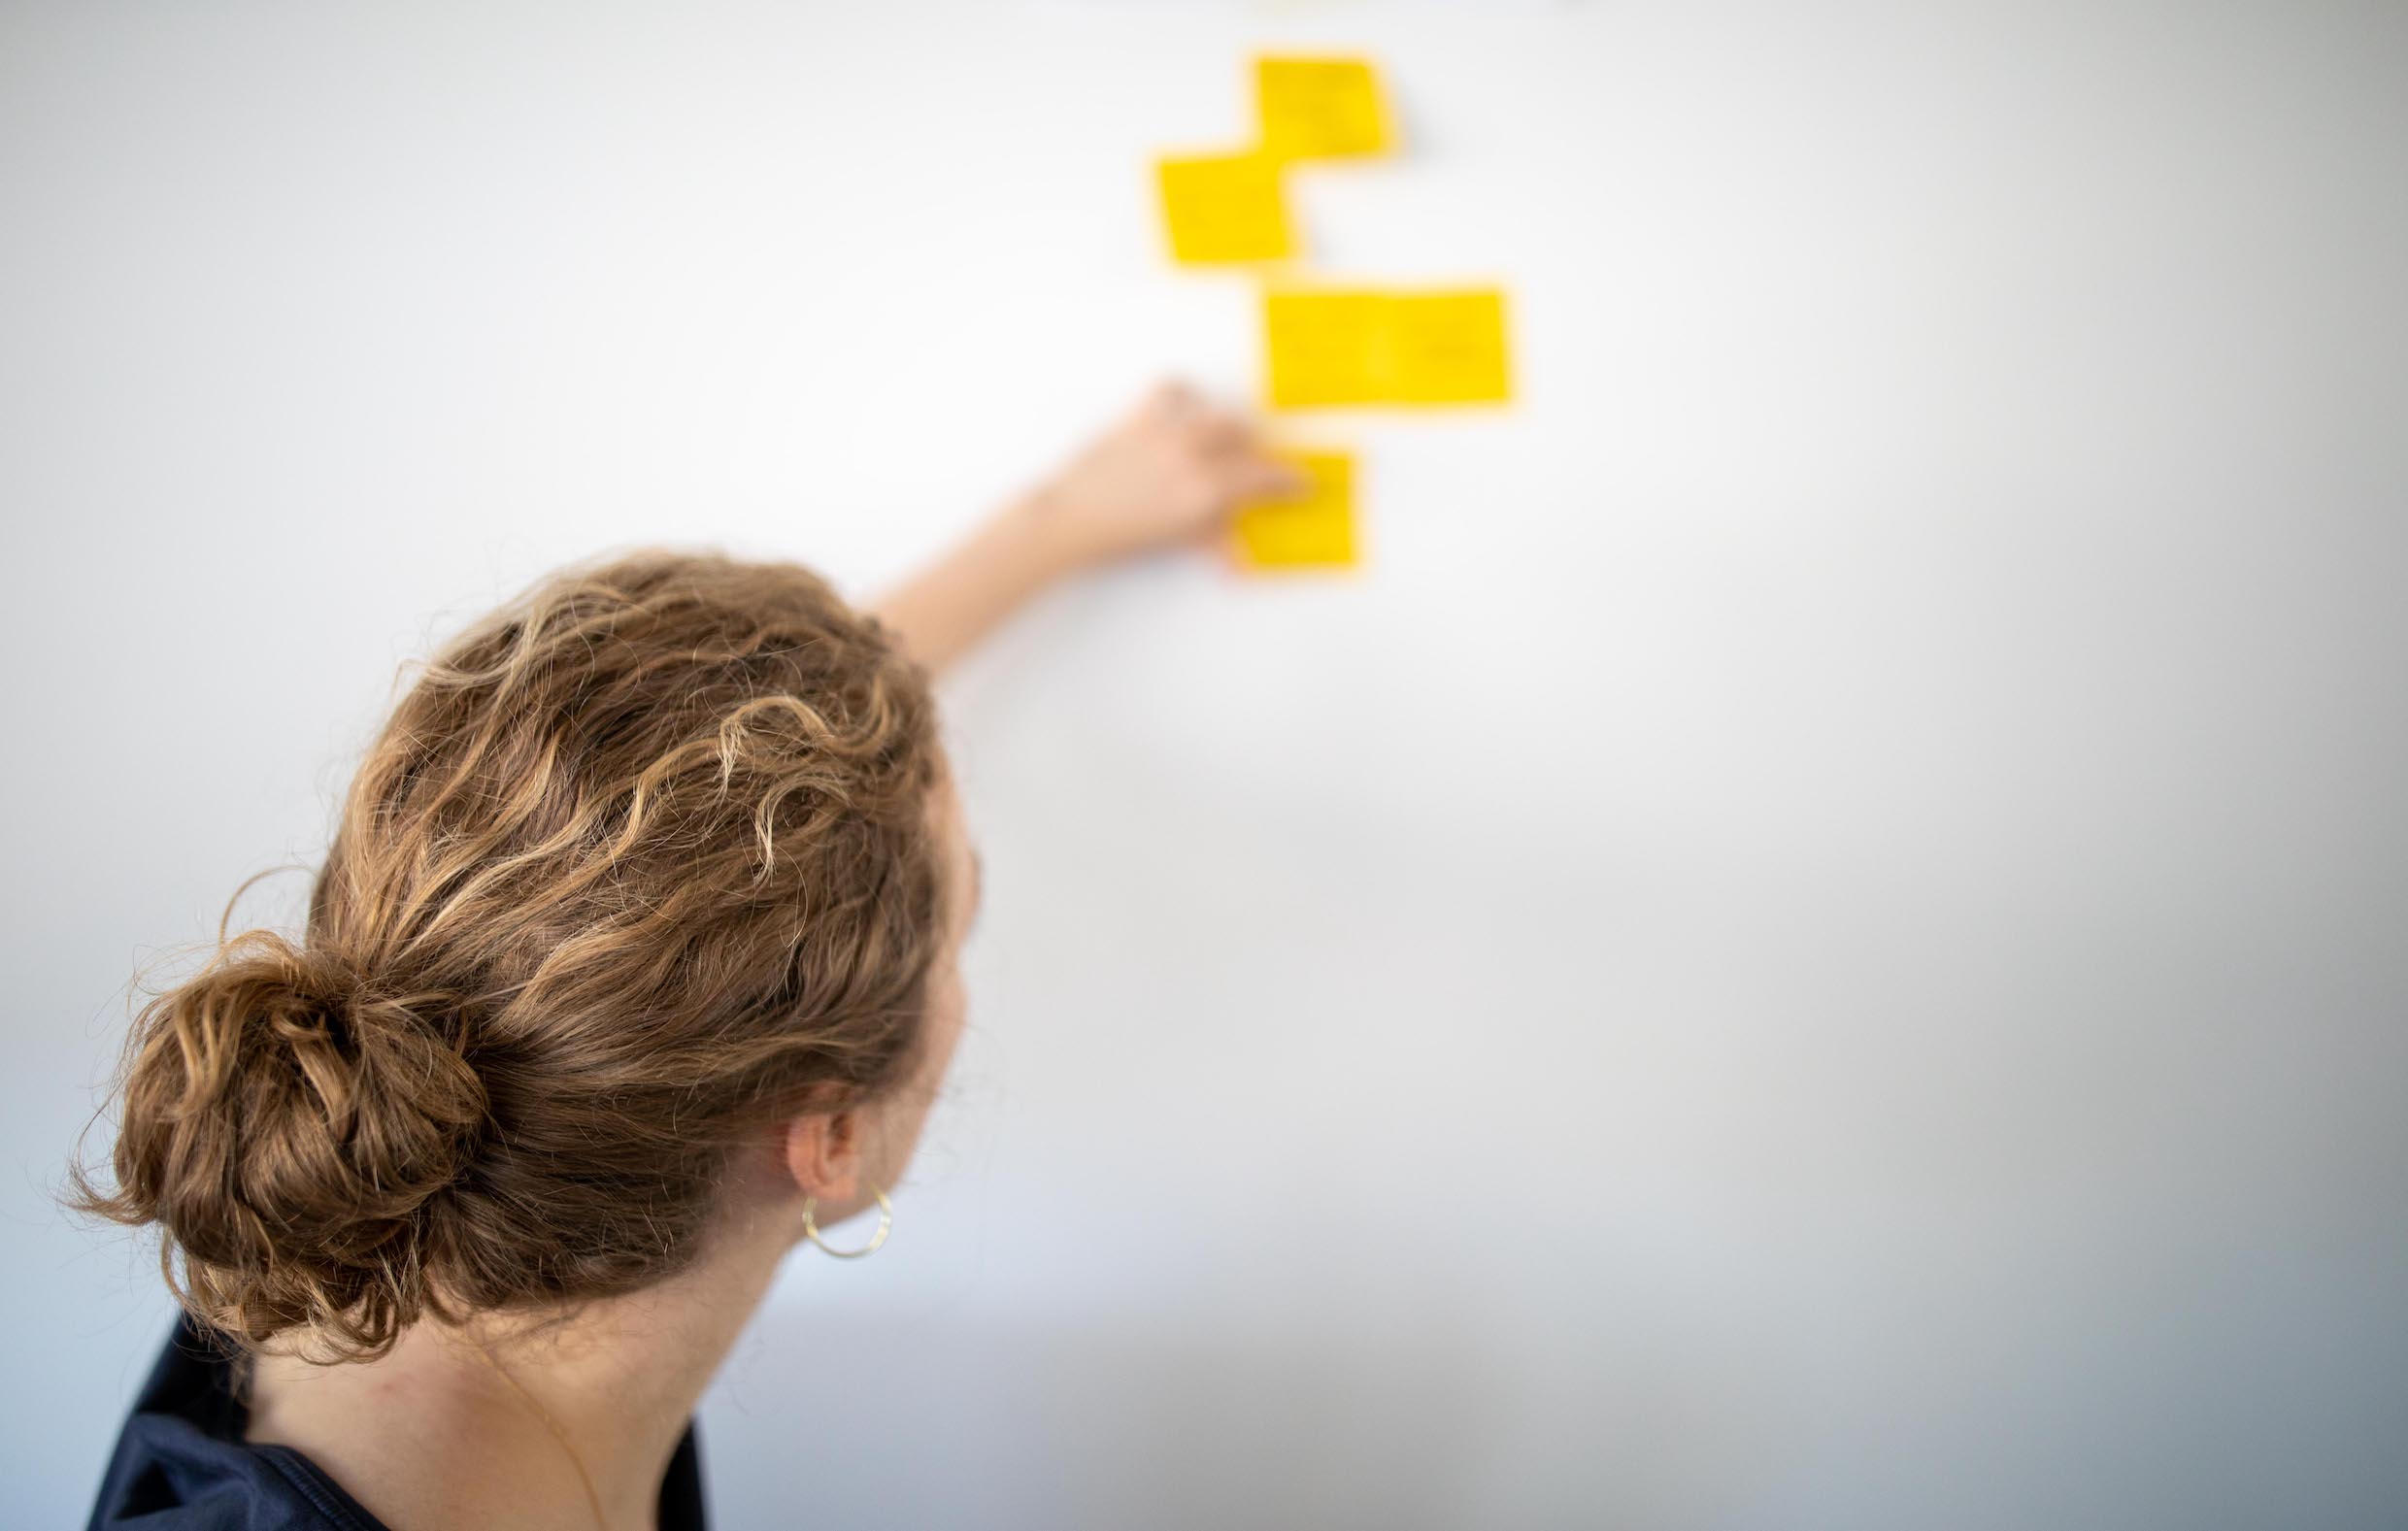 Person facing a whiteboard and attaching yellow post-its on it.